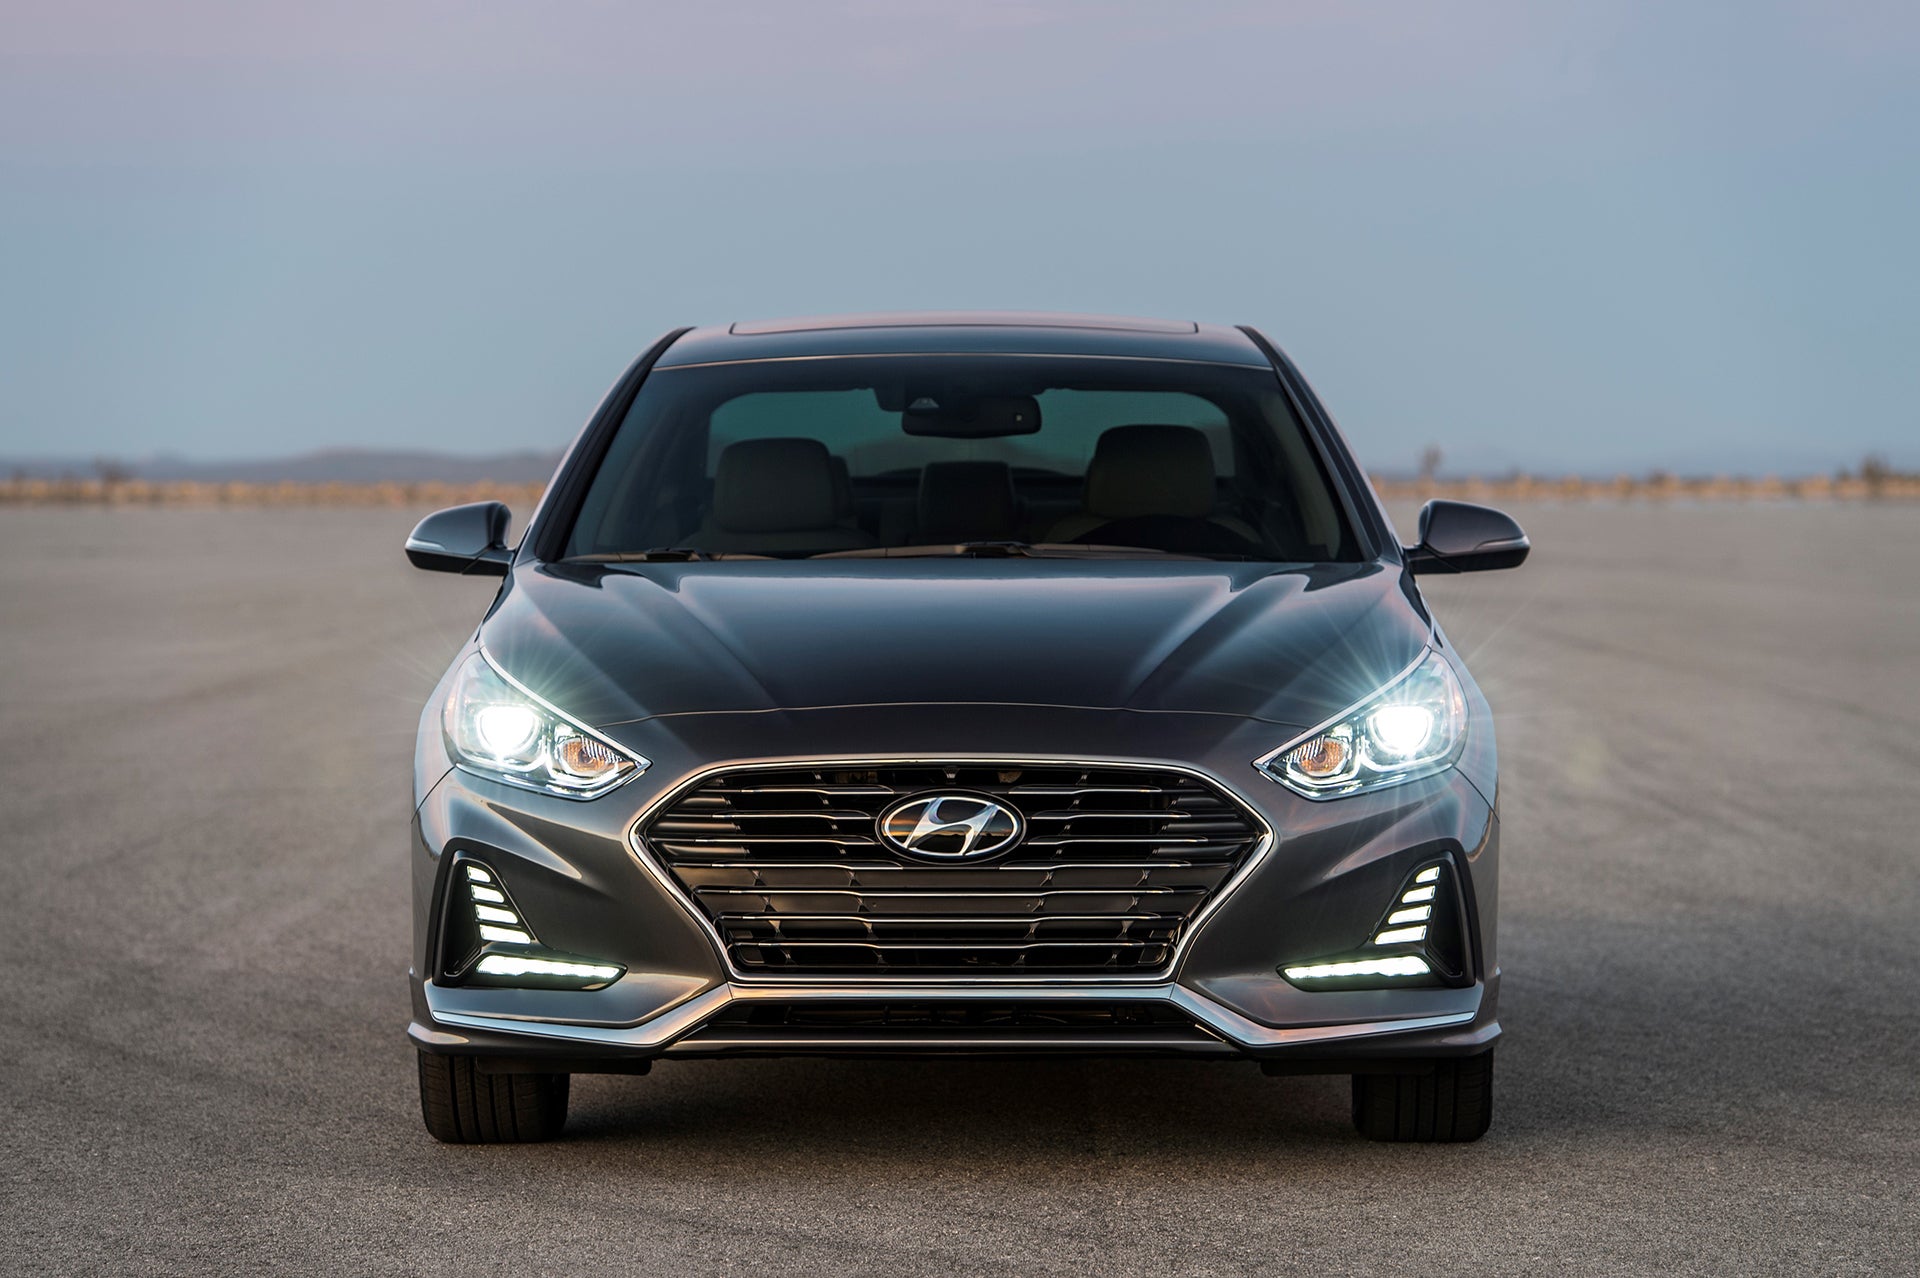 Let’s Talk About The 2018 Hyundai Sonata’s New Face